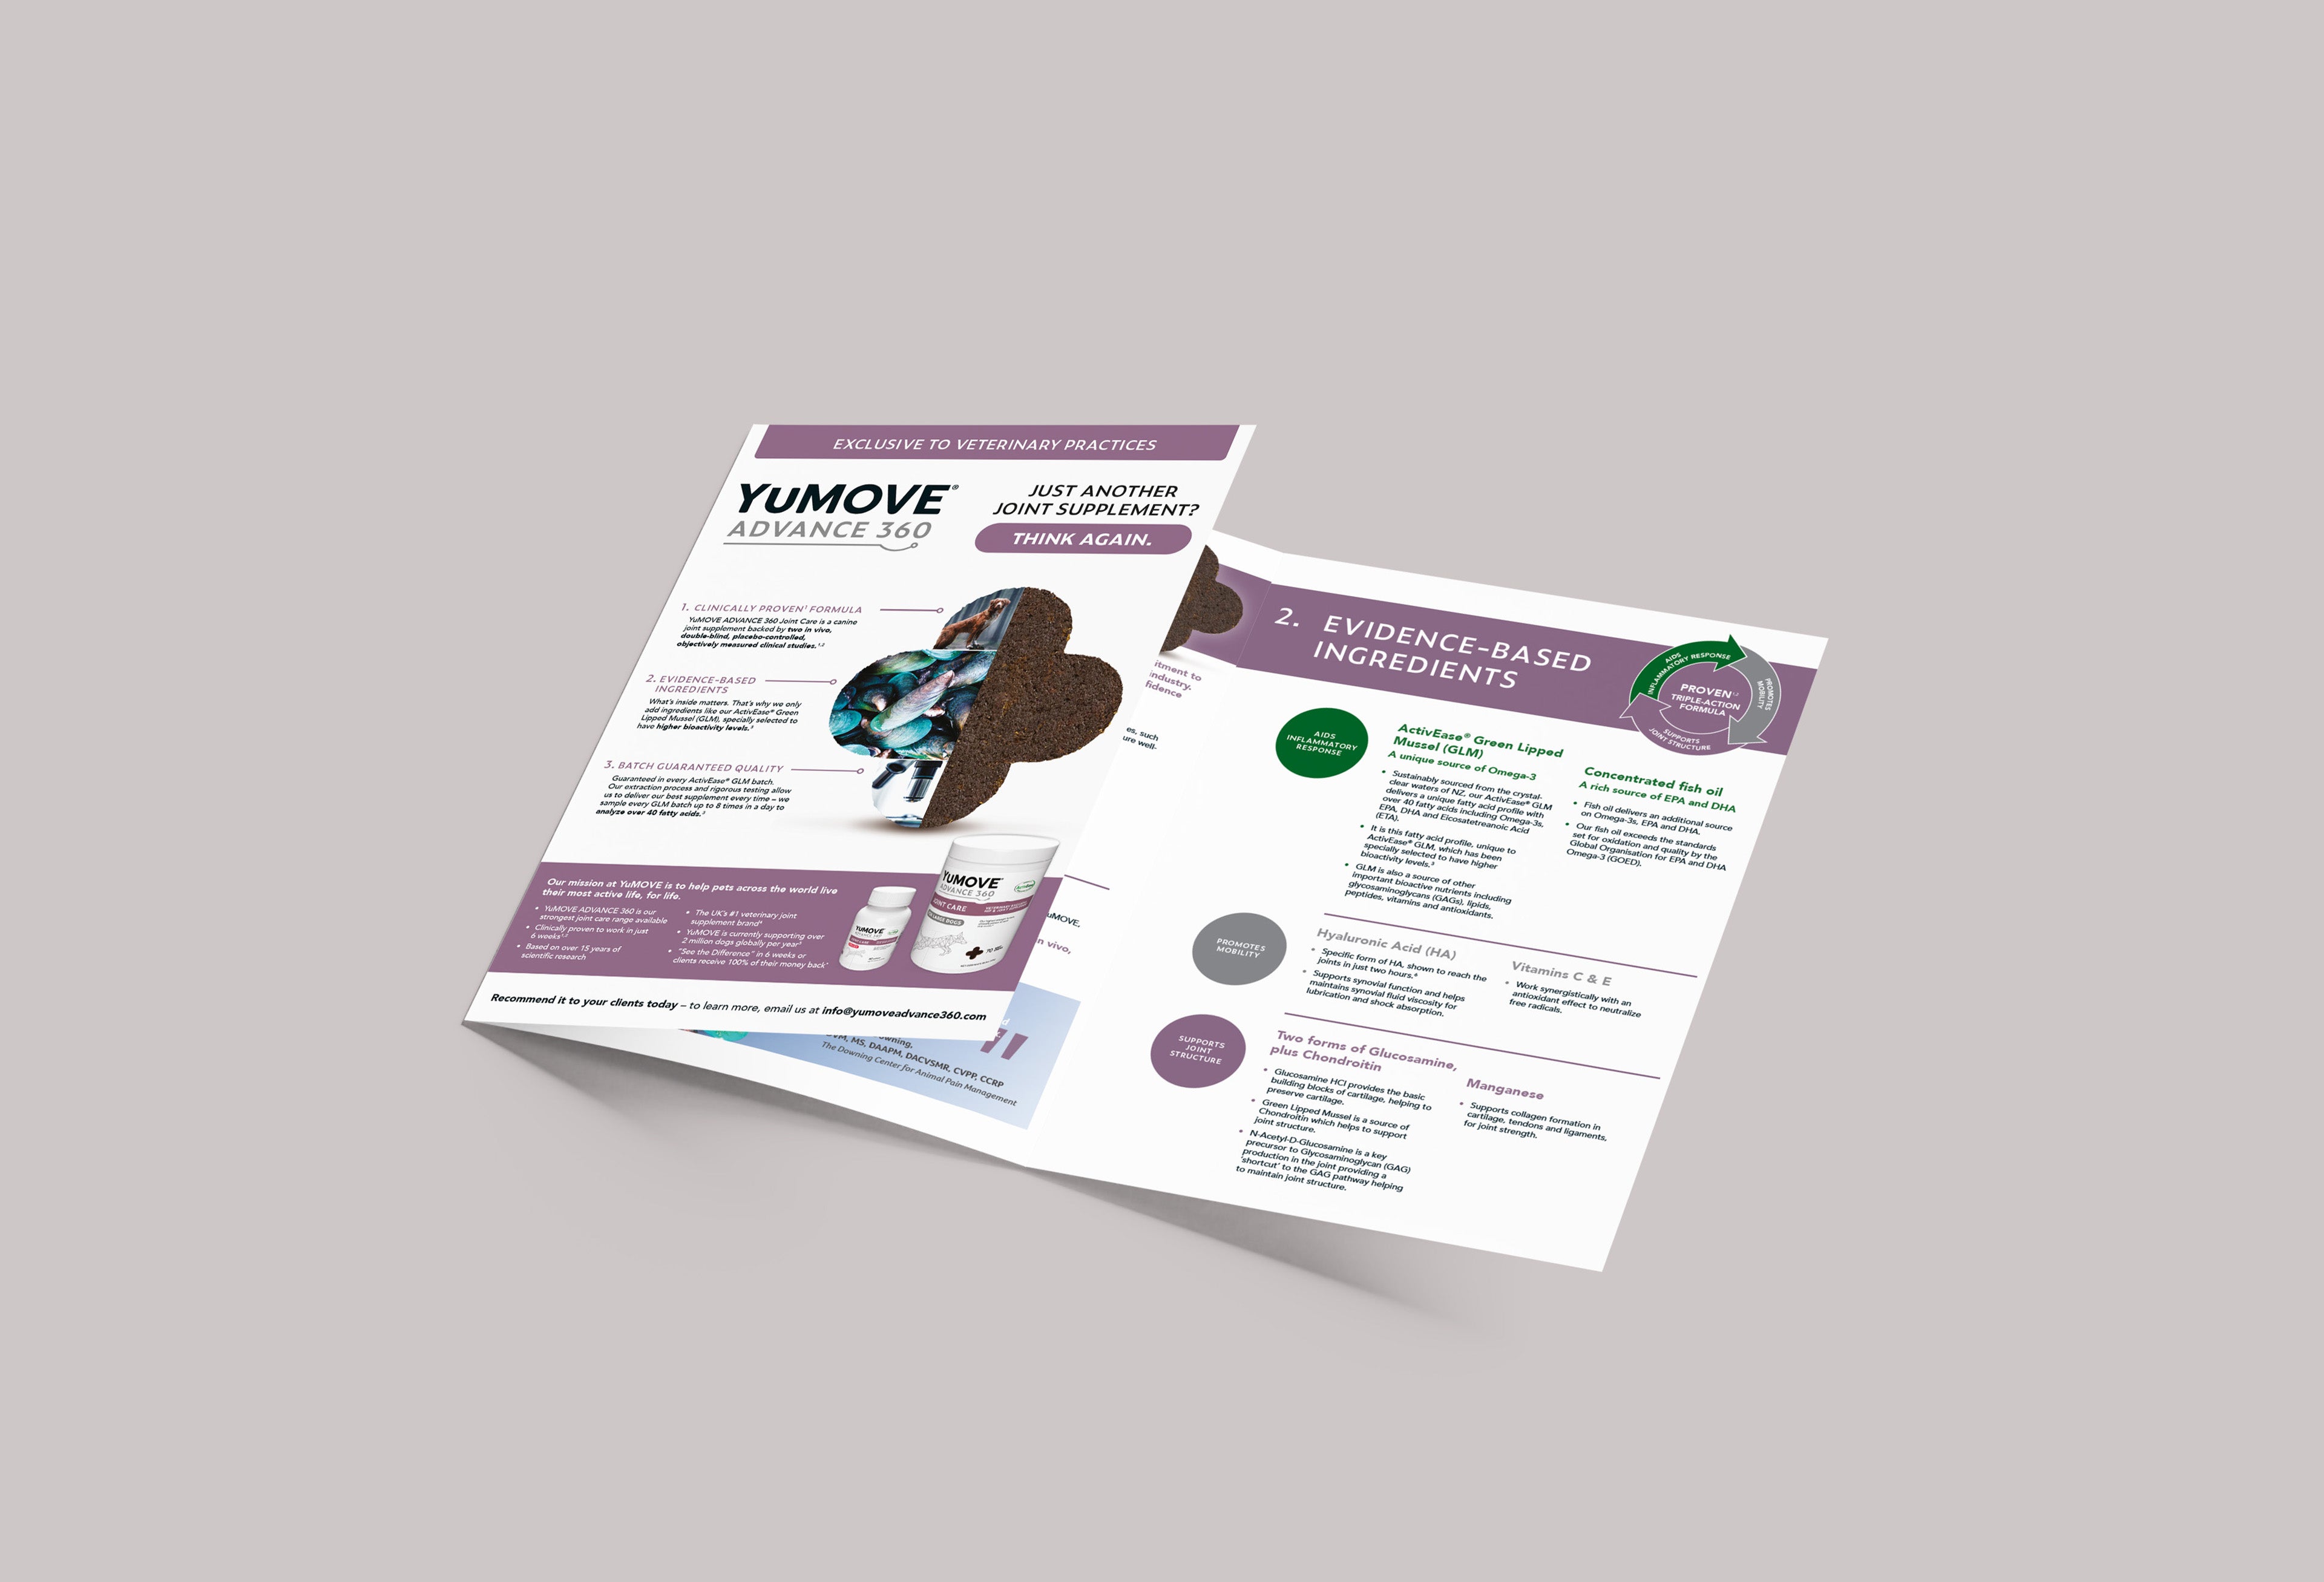 The image shows a brochure for YuMOVE ADVANCE 360 Joint Care supplements, highlighting key features and ingredients. It is angled to display both the front and inner content, with text and diagrams emphasizing the product's benefits.